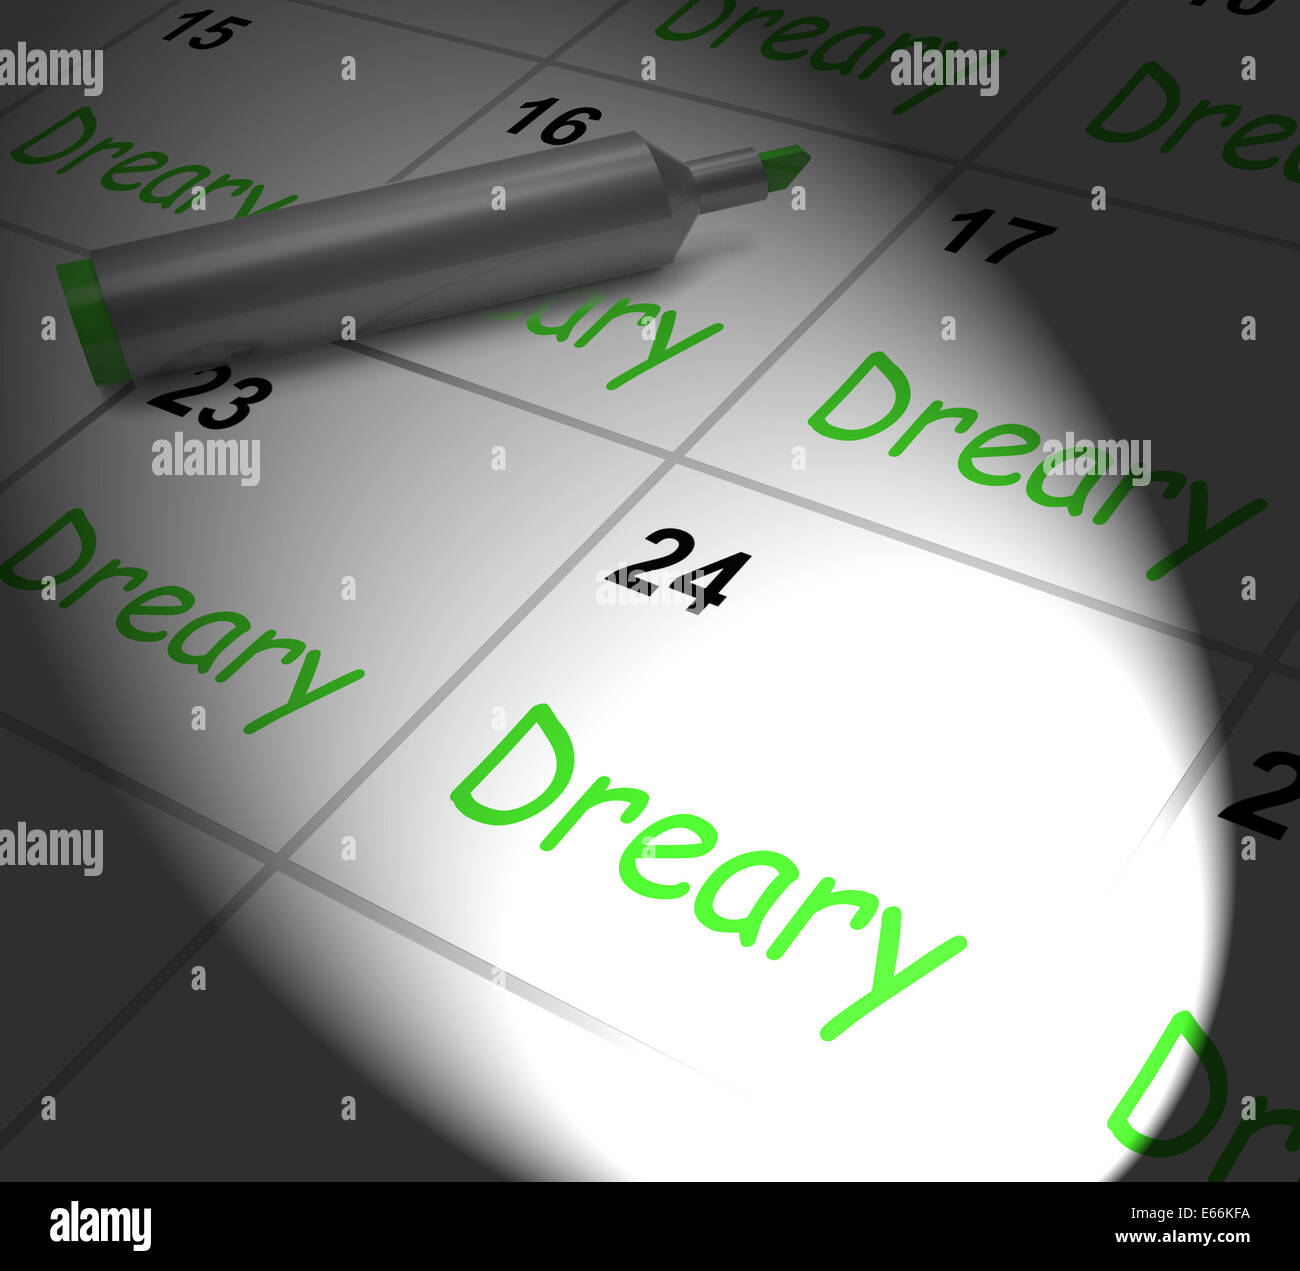 Dreary Calendar Displaying Monotonous Dull And Uneventful Stock Photo